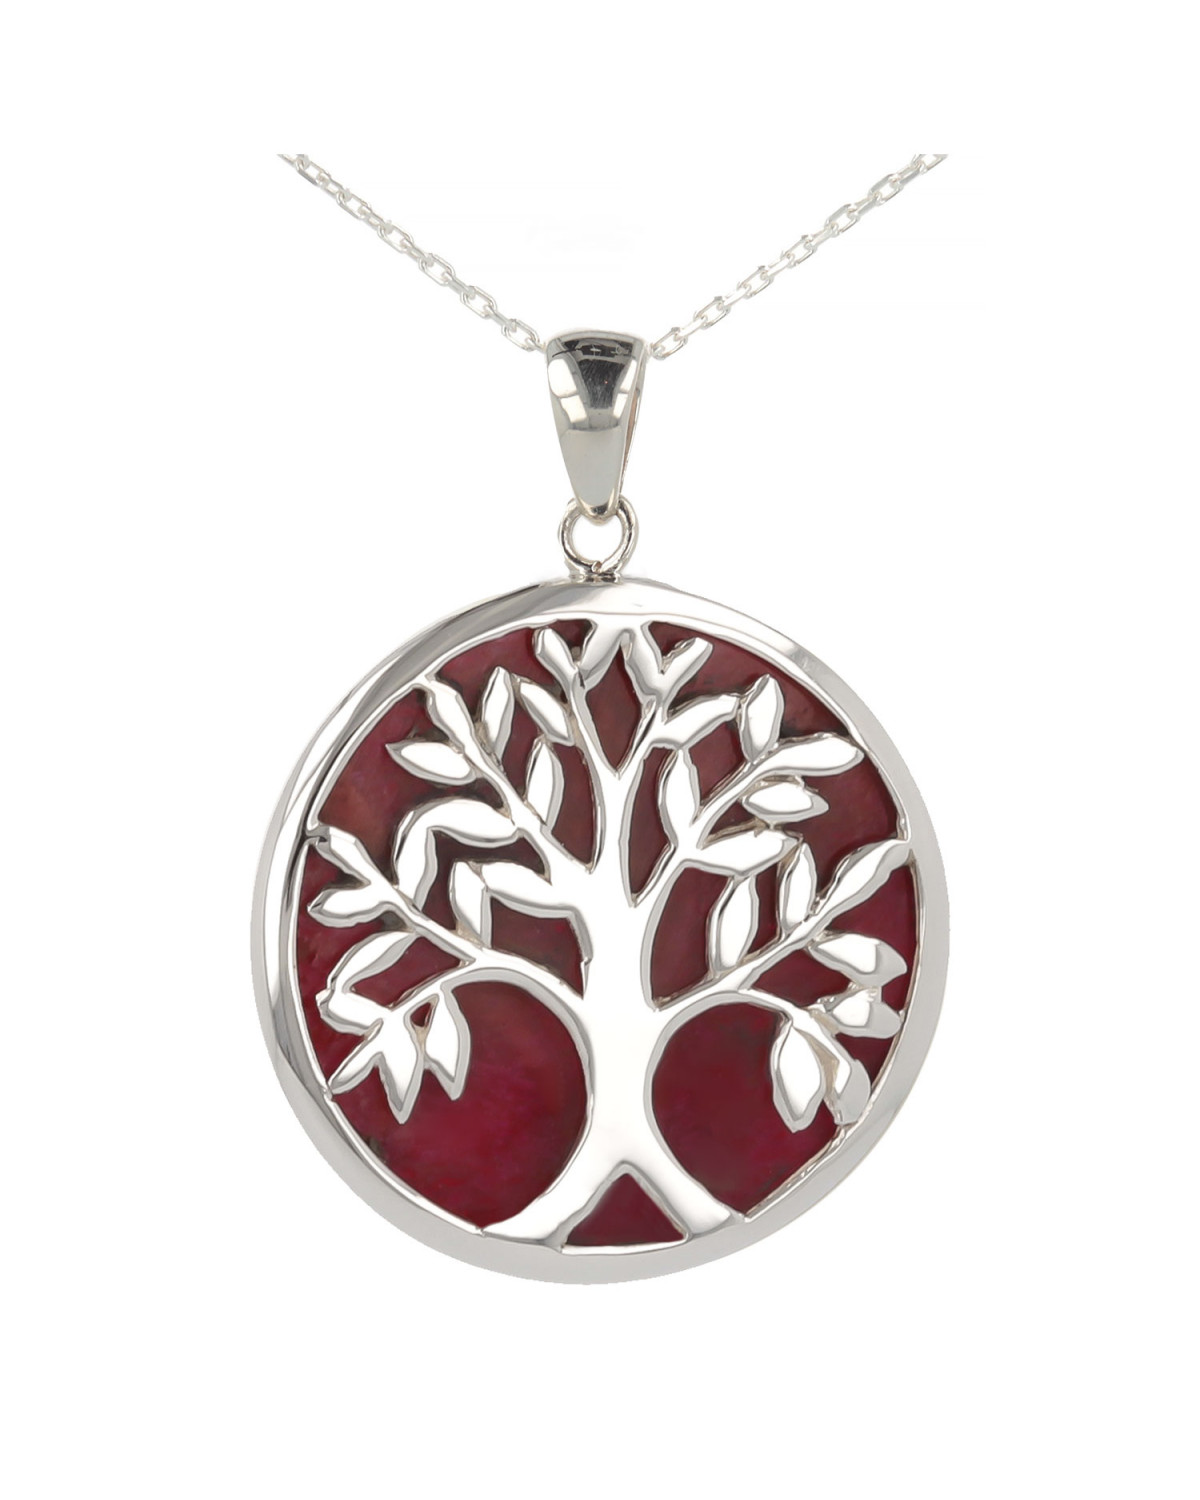 Jewelery Gift Symbol Tree of Life-Pendant -Red Color- Sterling Silver-oval-Unisex